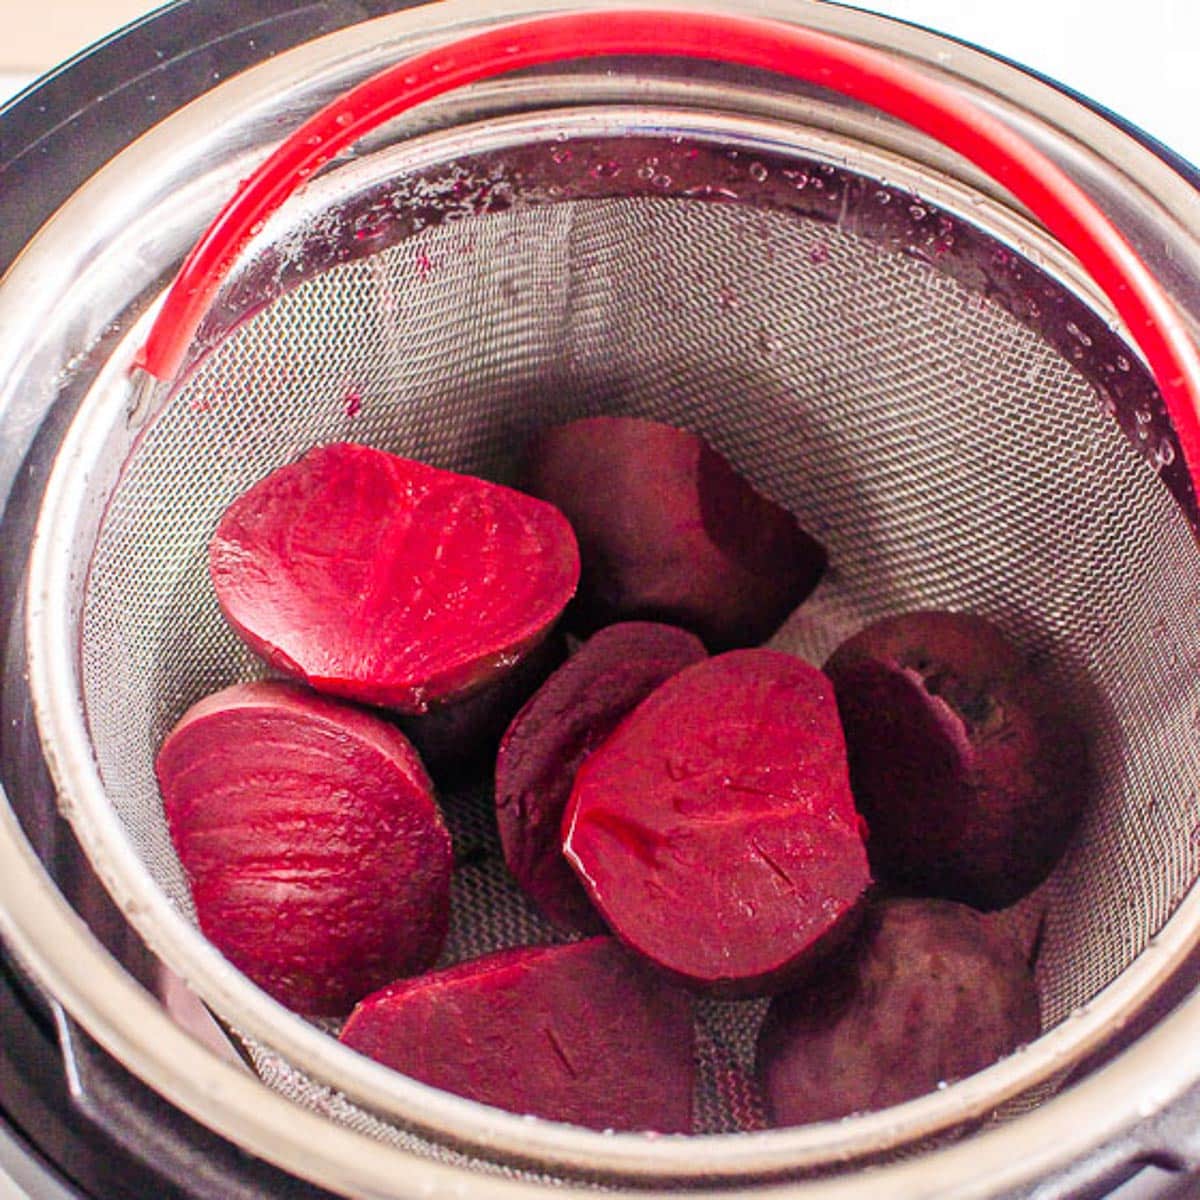 Instant Pot] Insta-Beets! How to Cook Beets in a Pressure Cooker